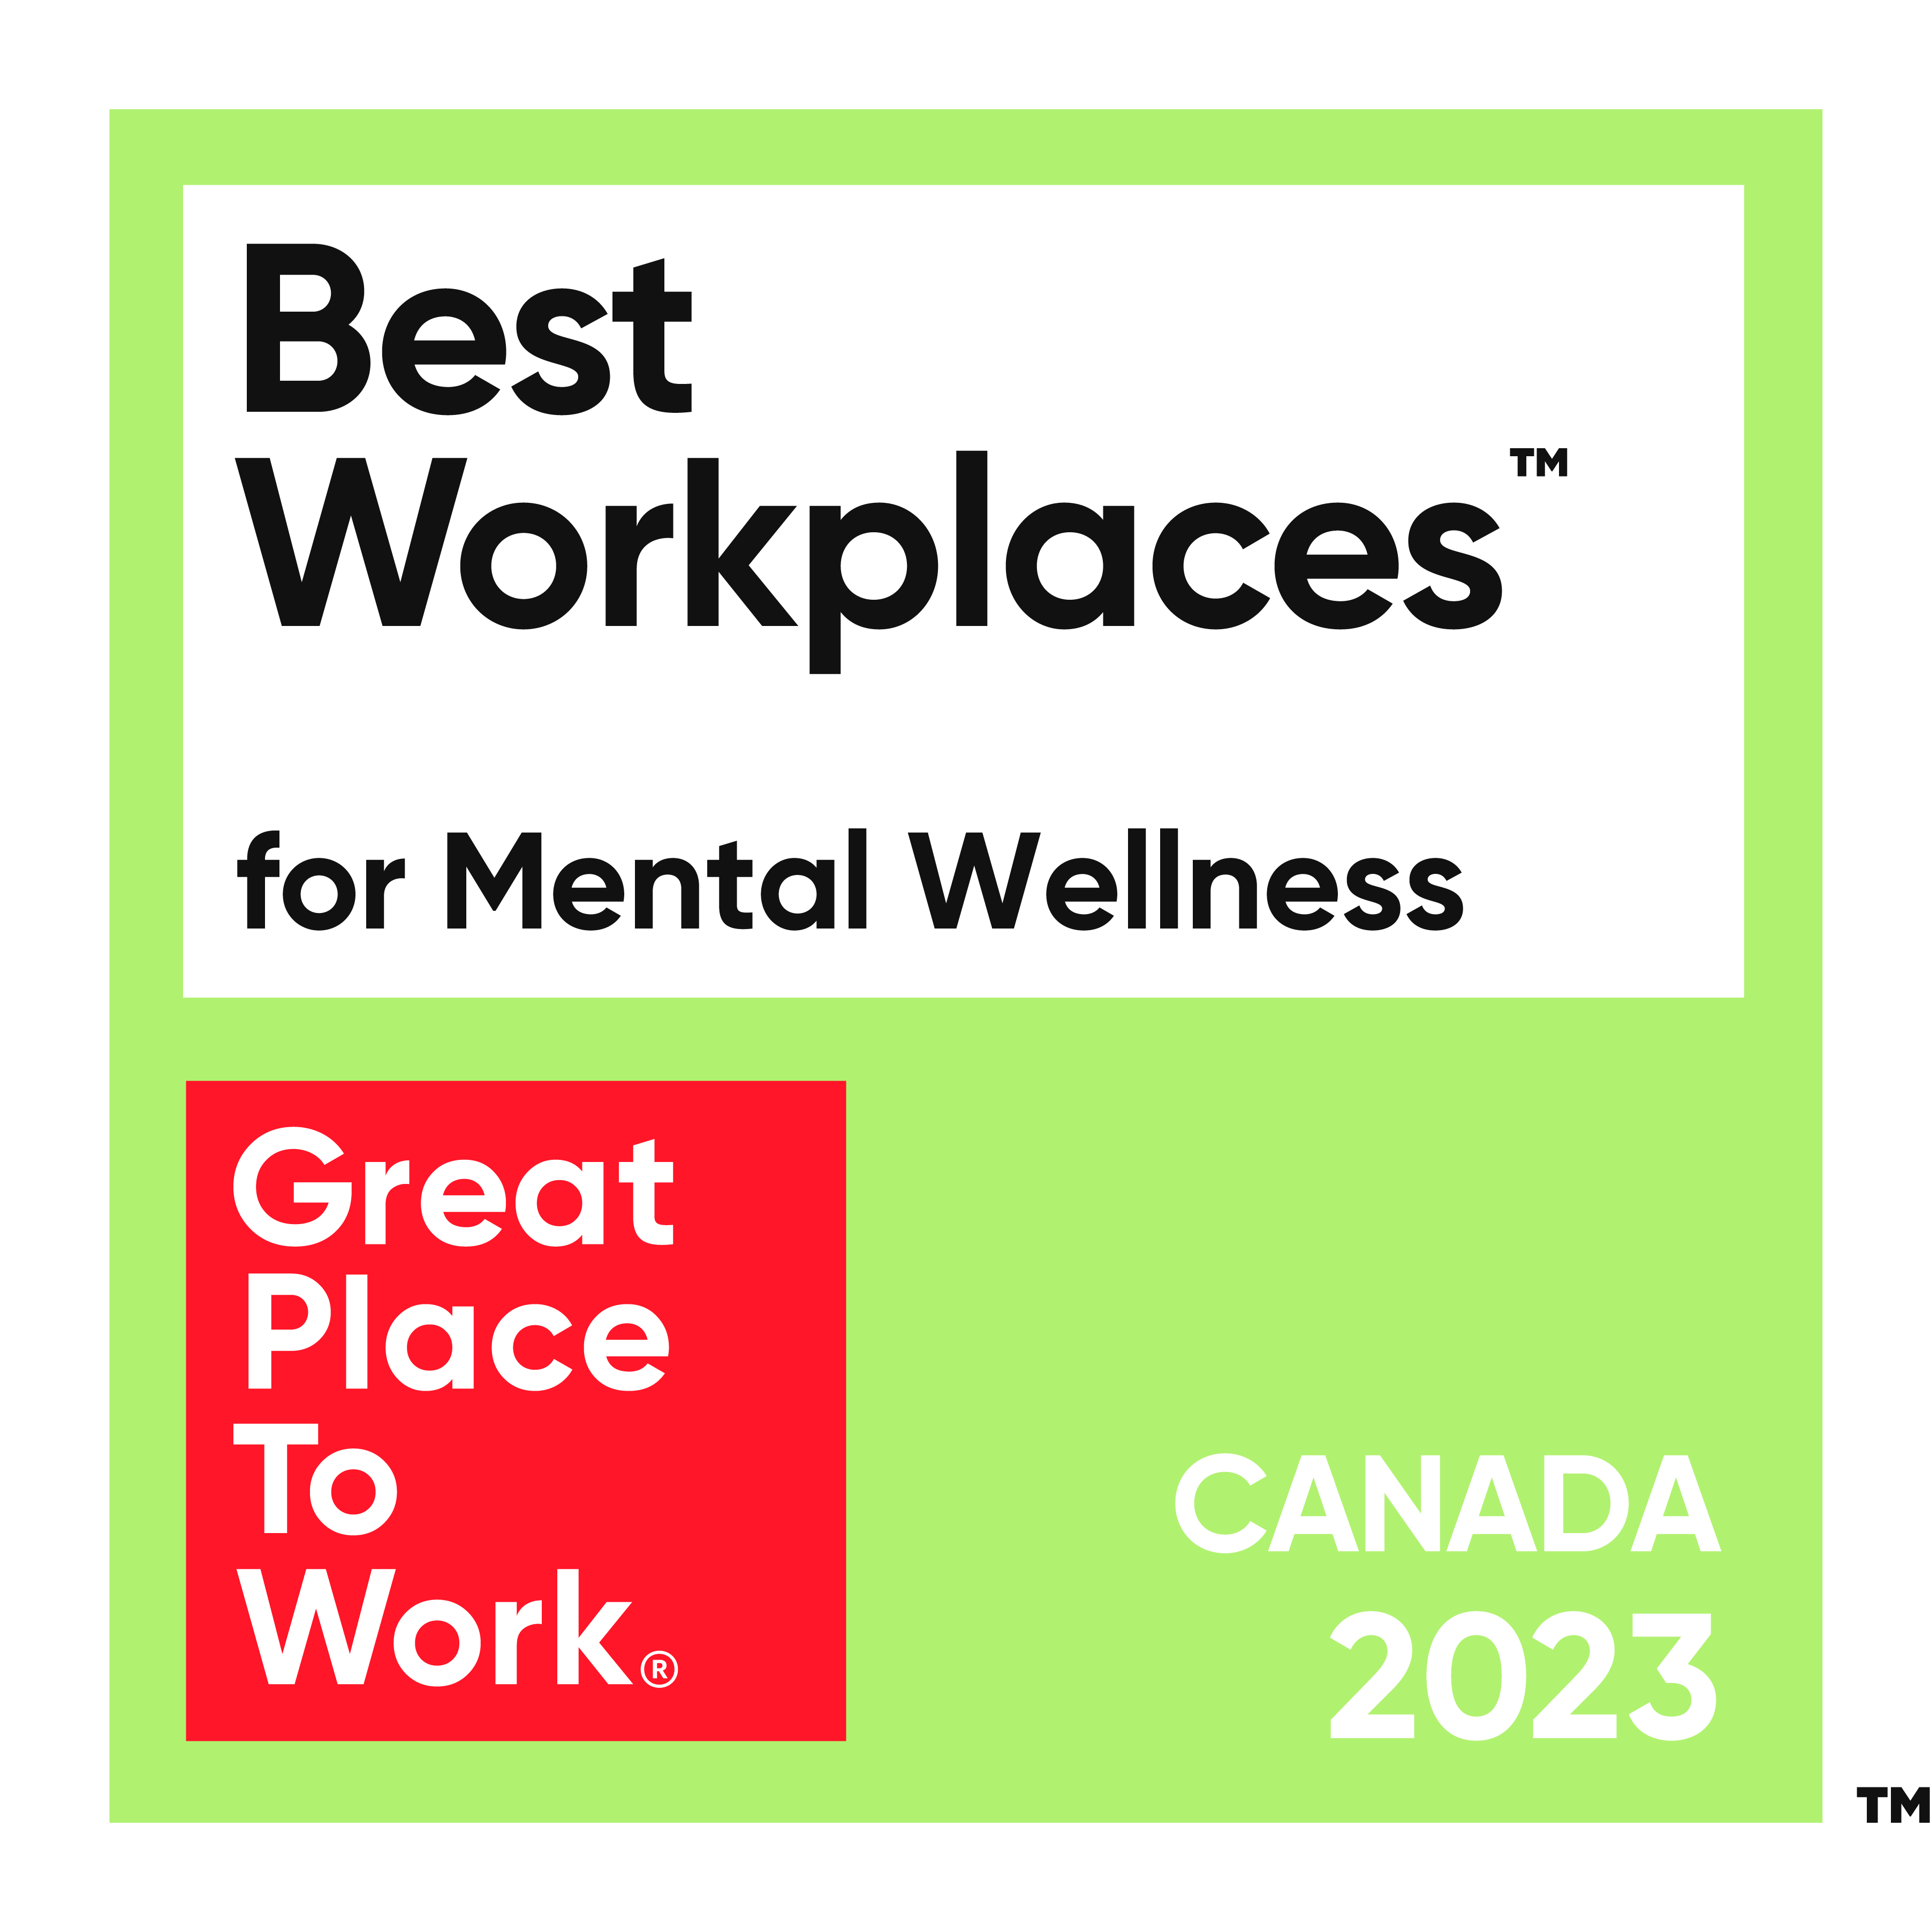 Best Workplaces for Mental Wellness. Great Place to Work Canada 2023